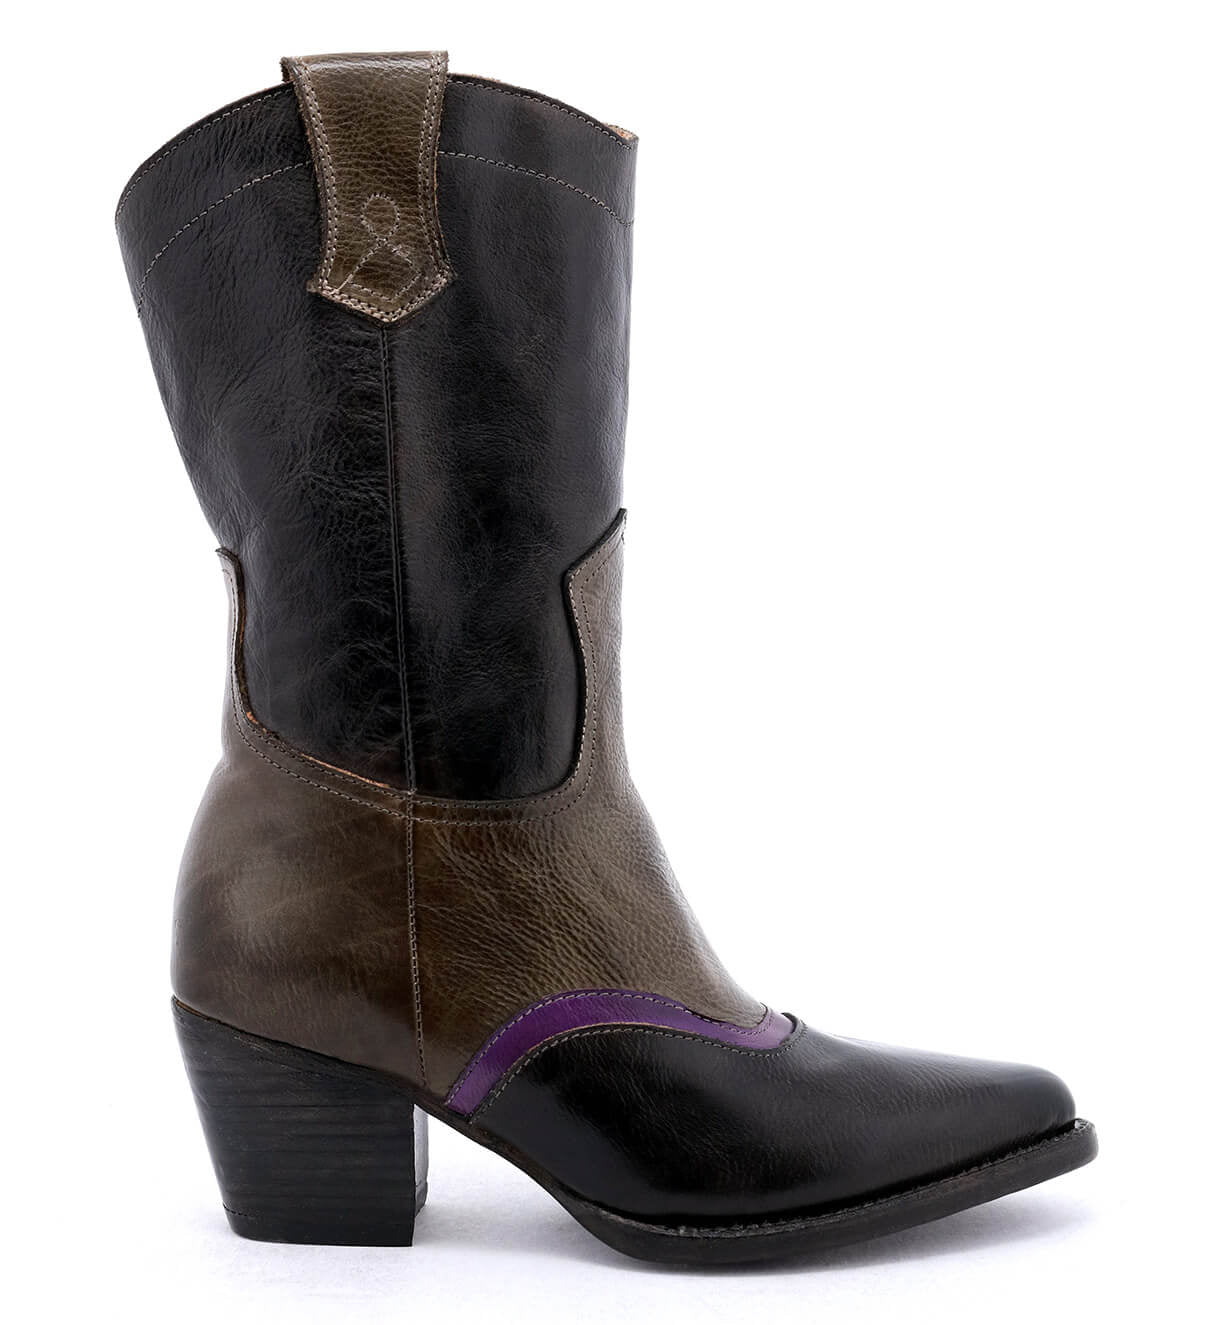 An Oak Tree Farms Basanti women's black and purple leather cowboy boot with a pointed toe on a white background.